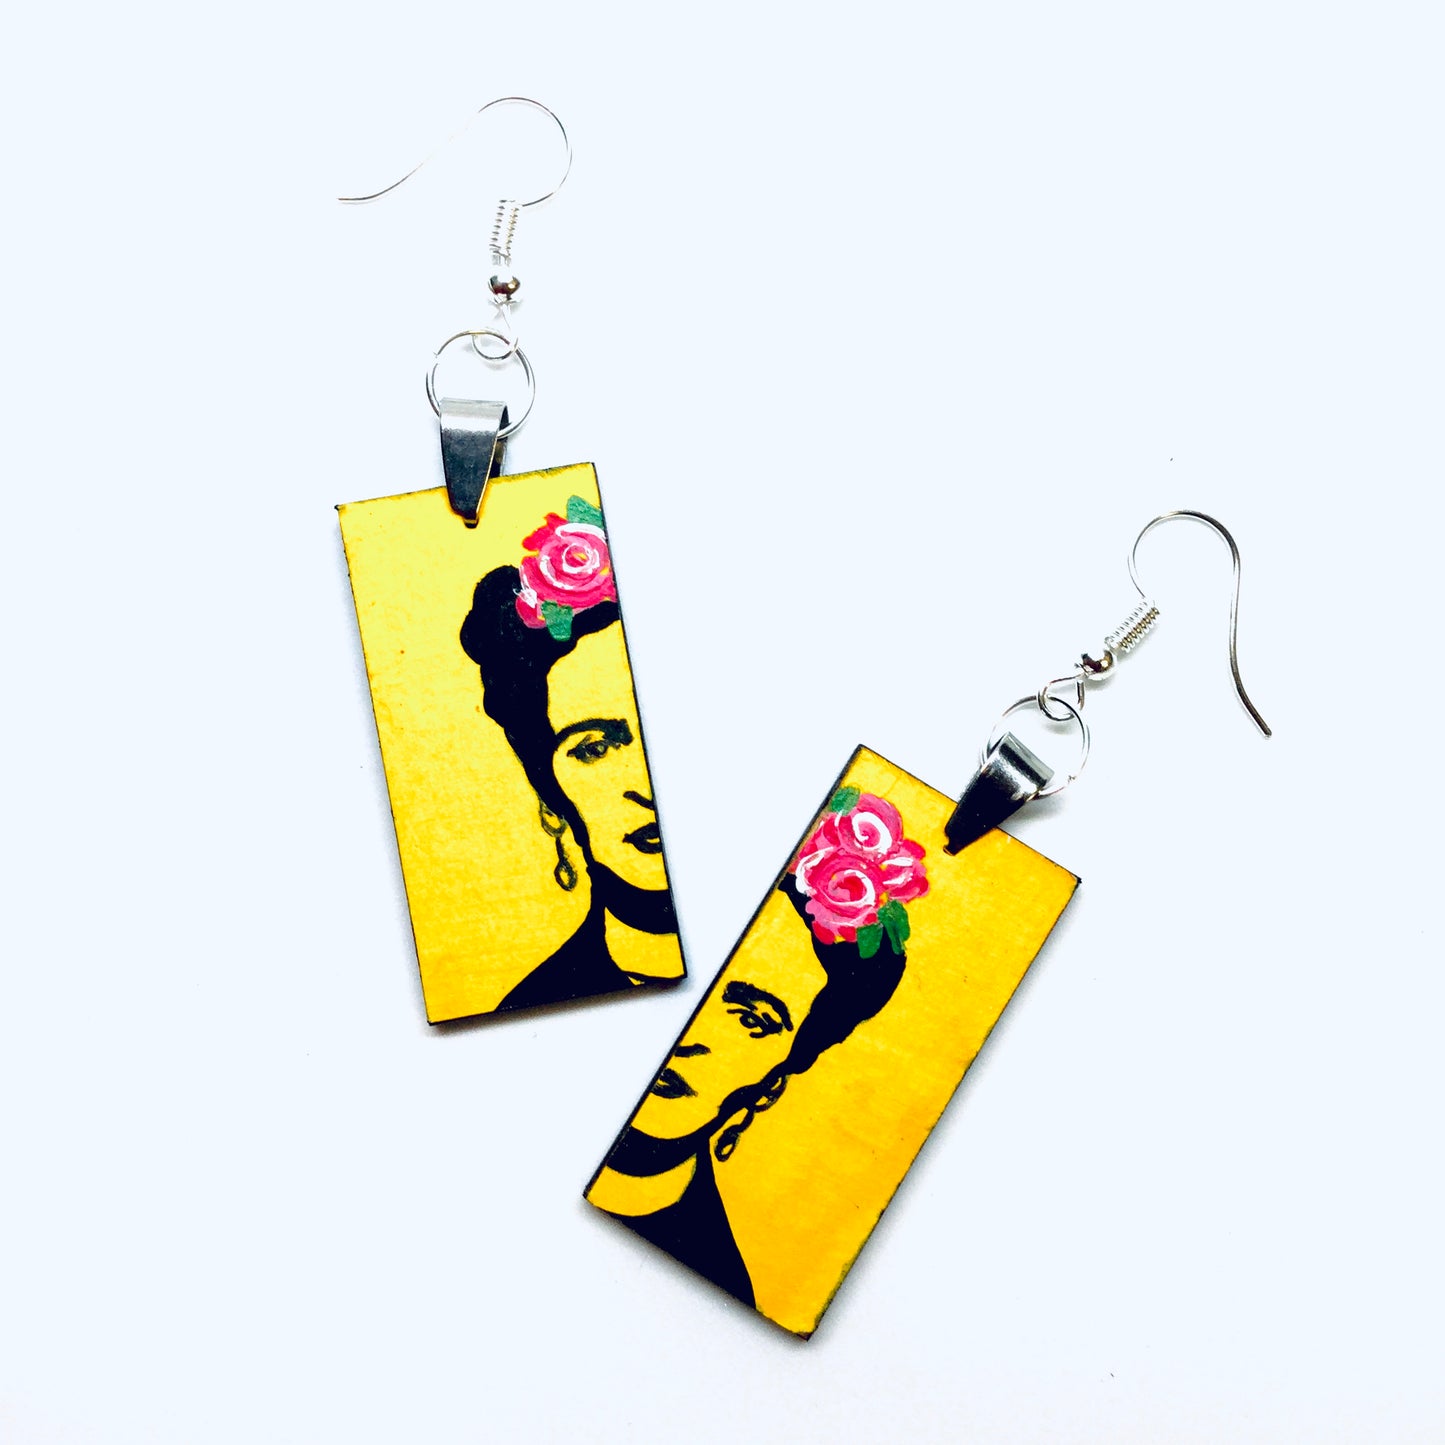 Frida earrings. Frida Kahlo hand painted earrings. Stencil art and pink roses. Wearable Art. Fridamaniacs Mexican jewelry and accessories